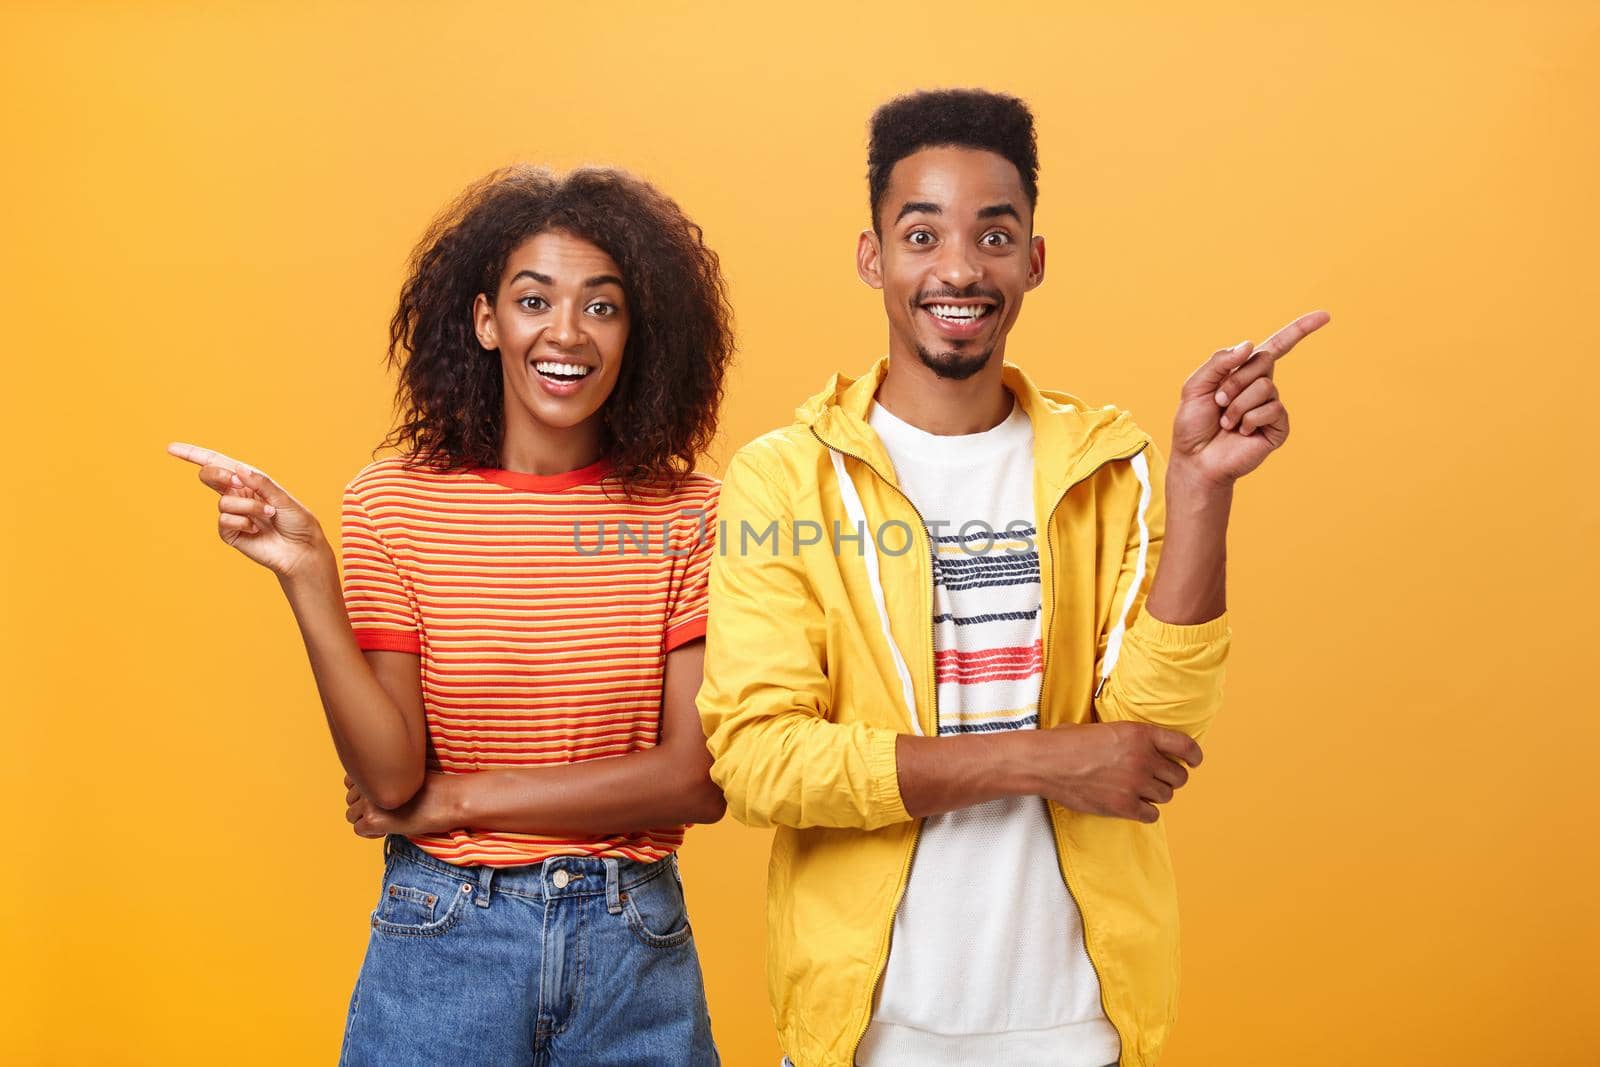 Which one telling true. Joyful and friendly good-looking couple, african american woman pointing left and dark-skinned guy right smiling broadly at camera giving advices but disagree with each other.